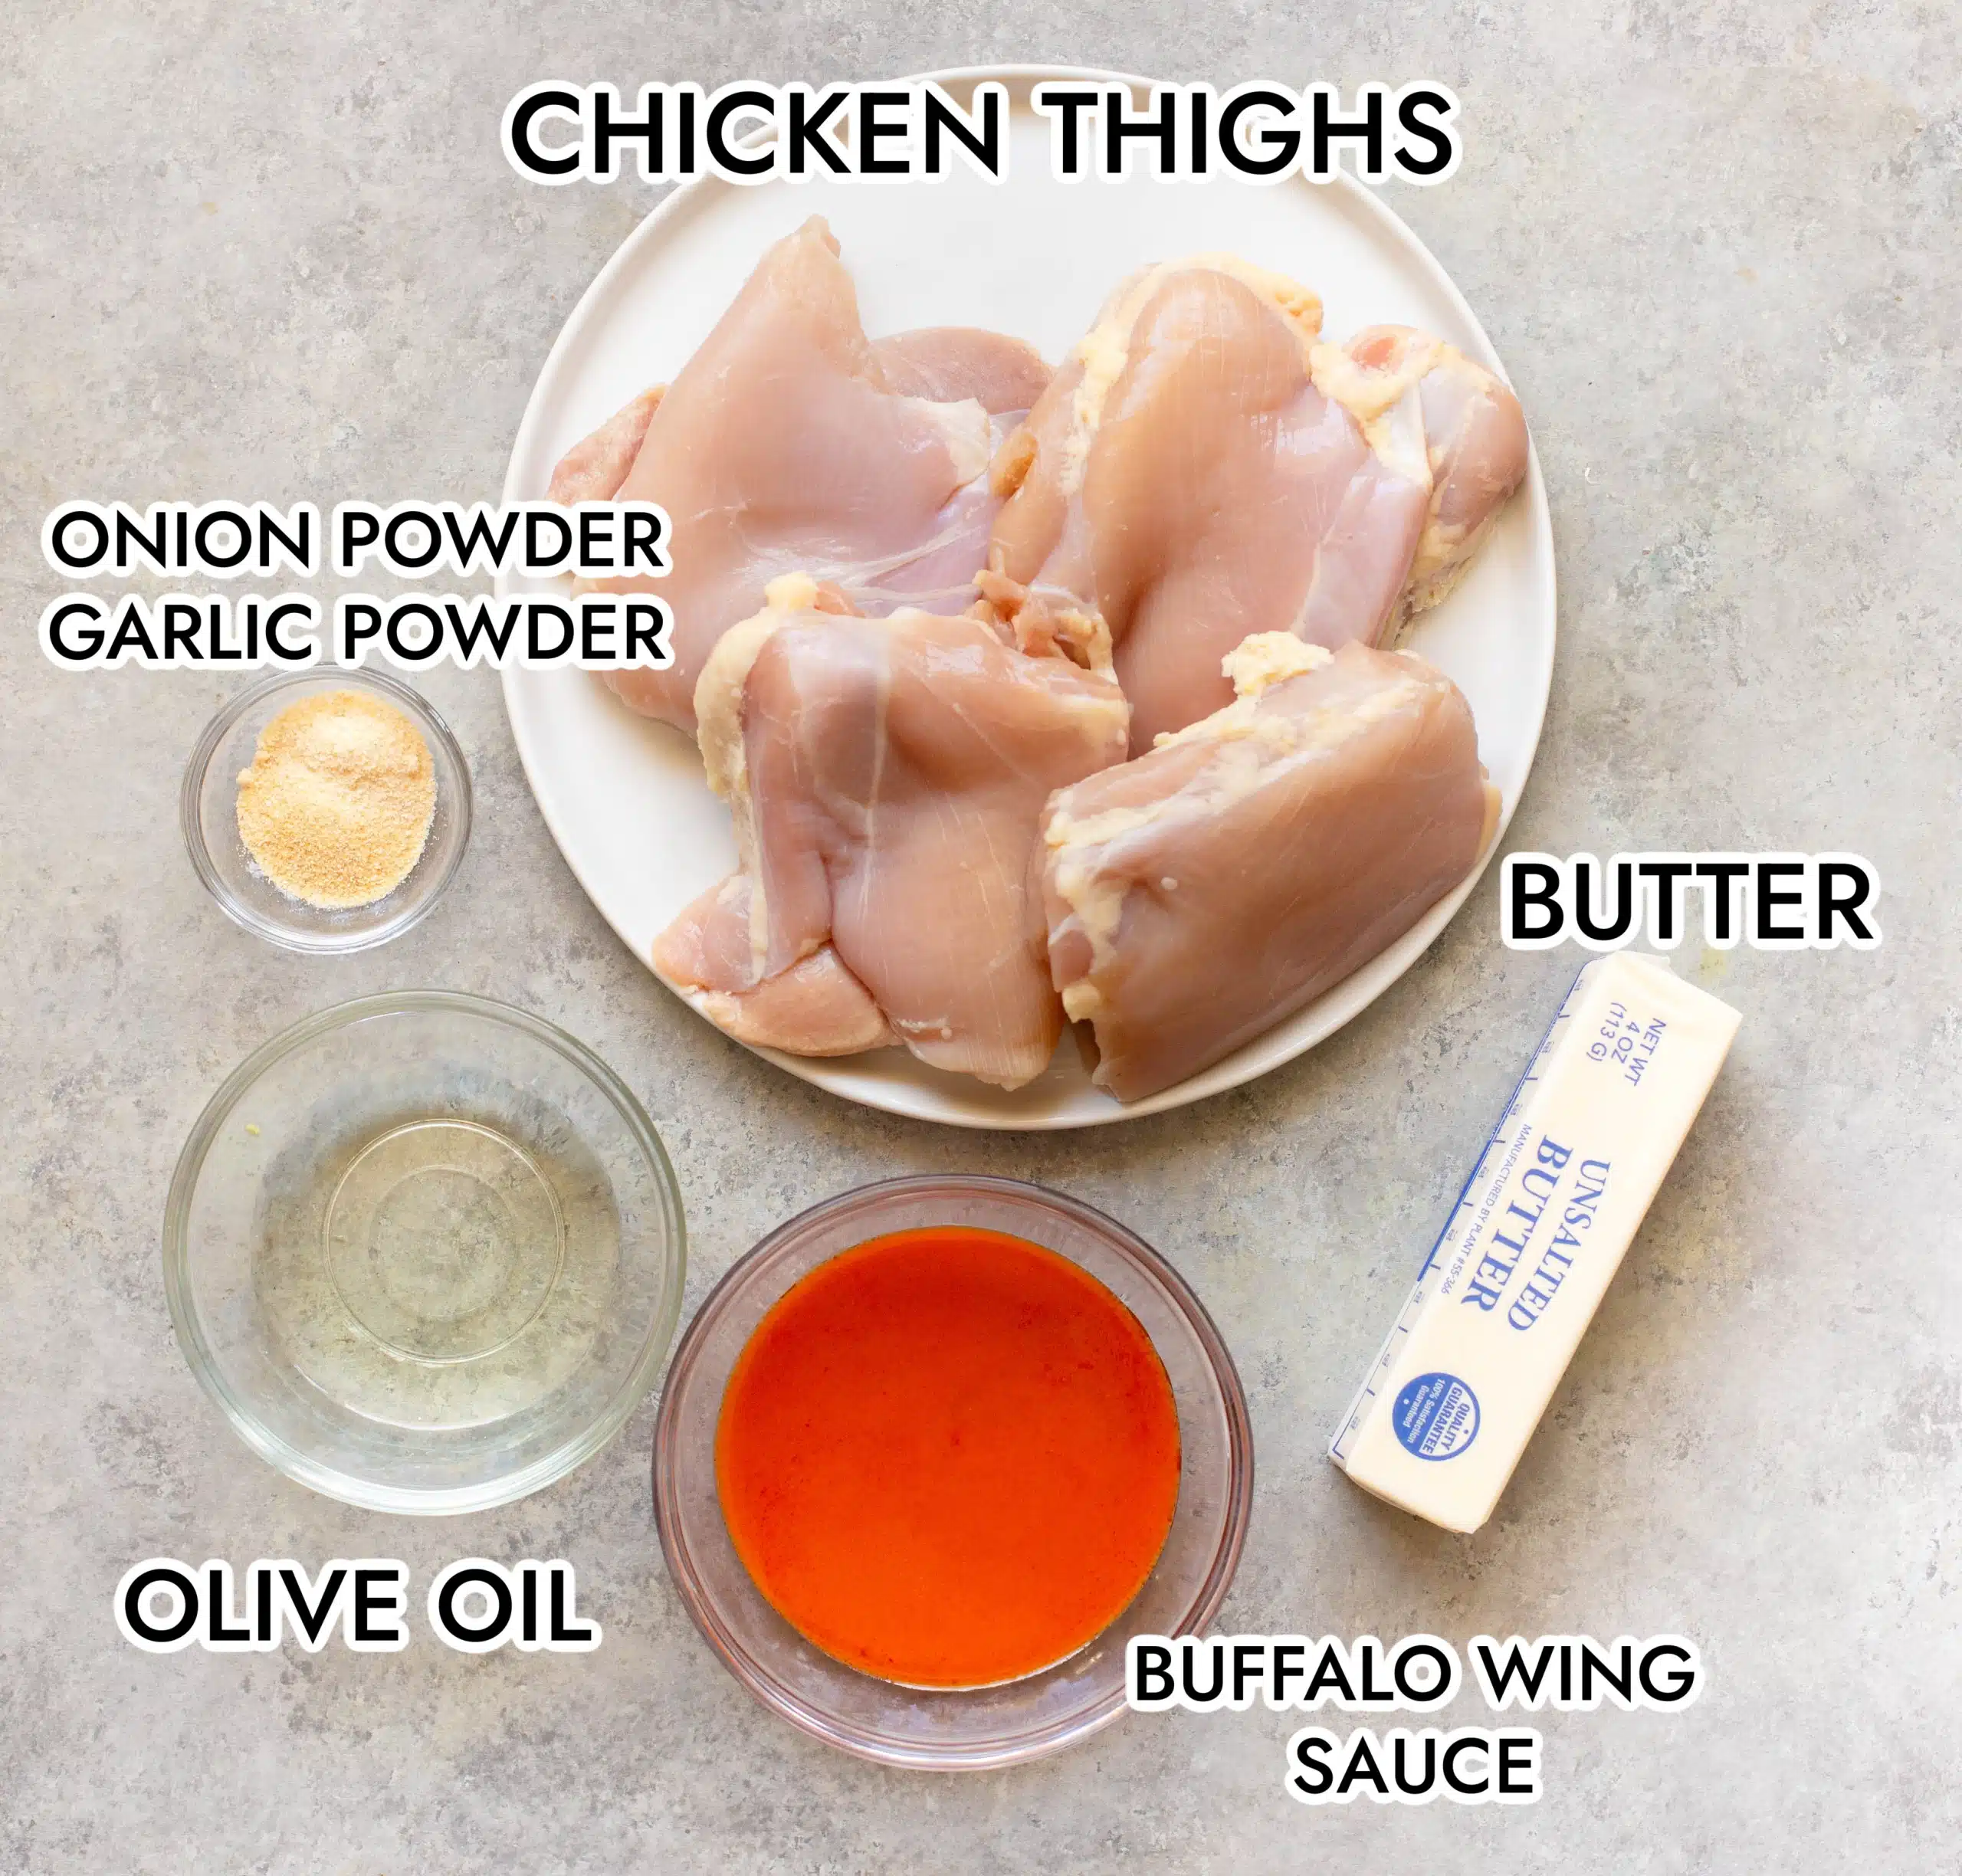 Ingredients for air fryer buffalo chicken thighs on a gray background, including chicken thighs, onion powder, garlic powder, olive oil, buffalo wing sauce, and butter.